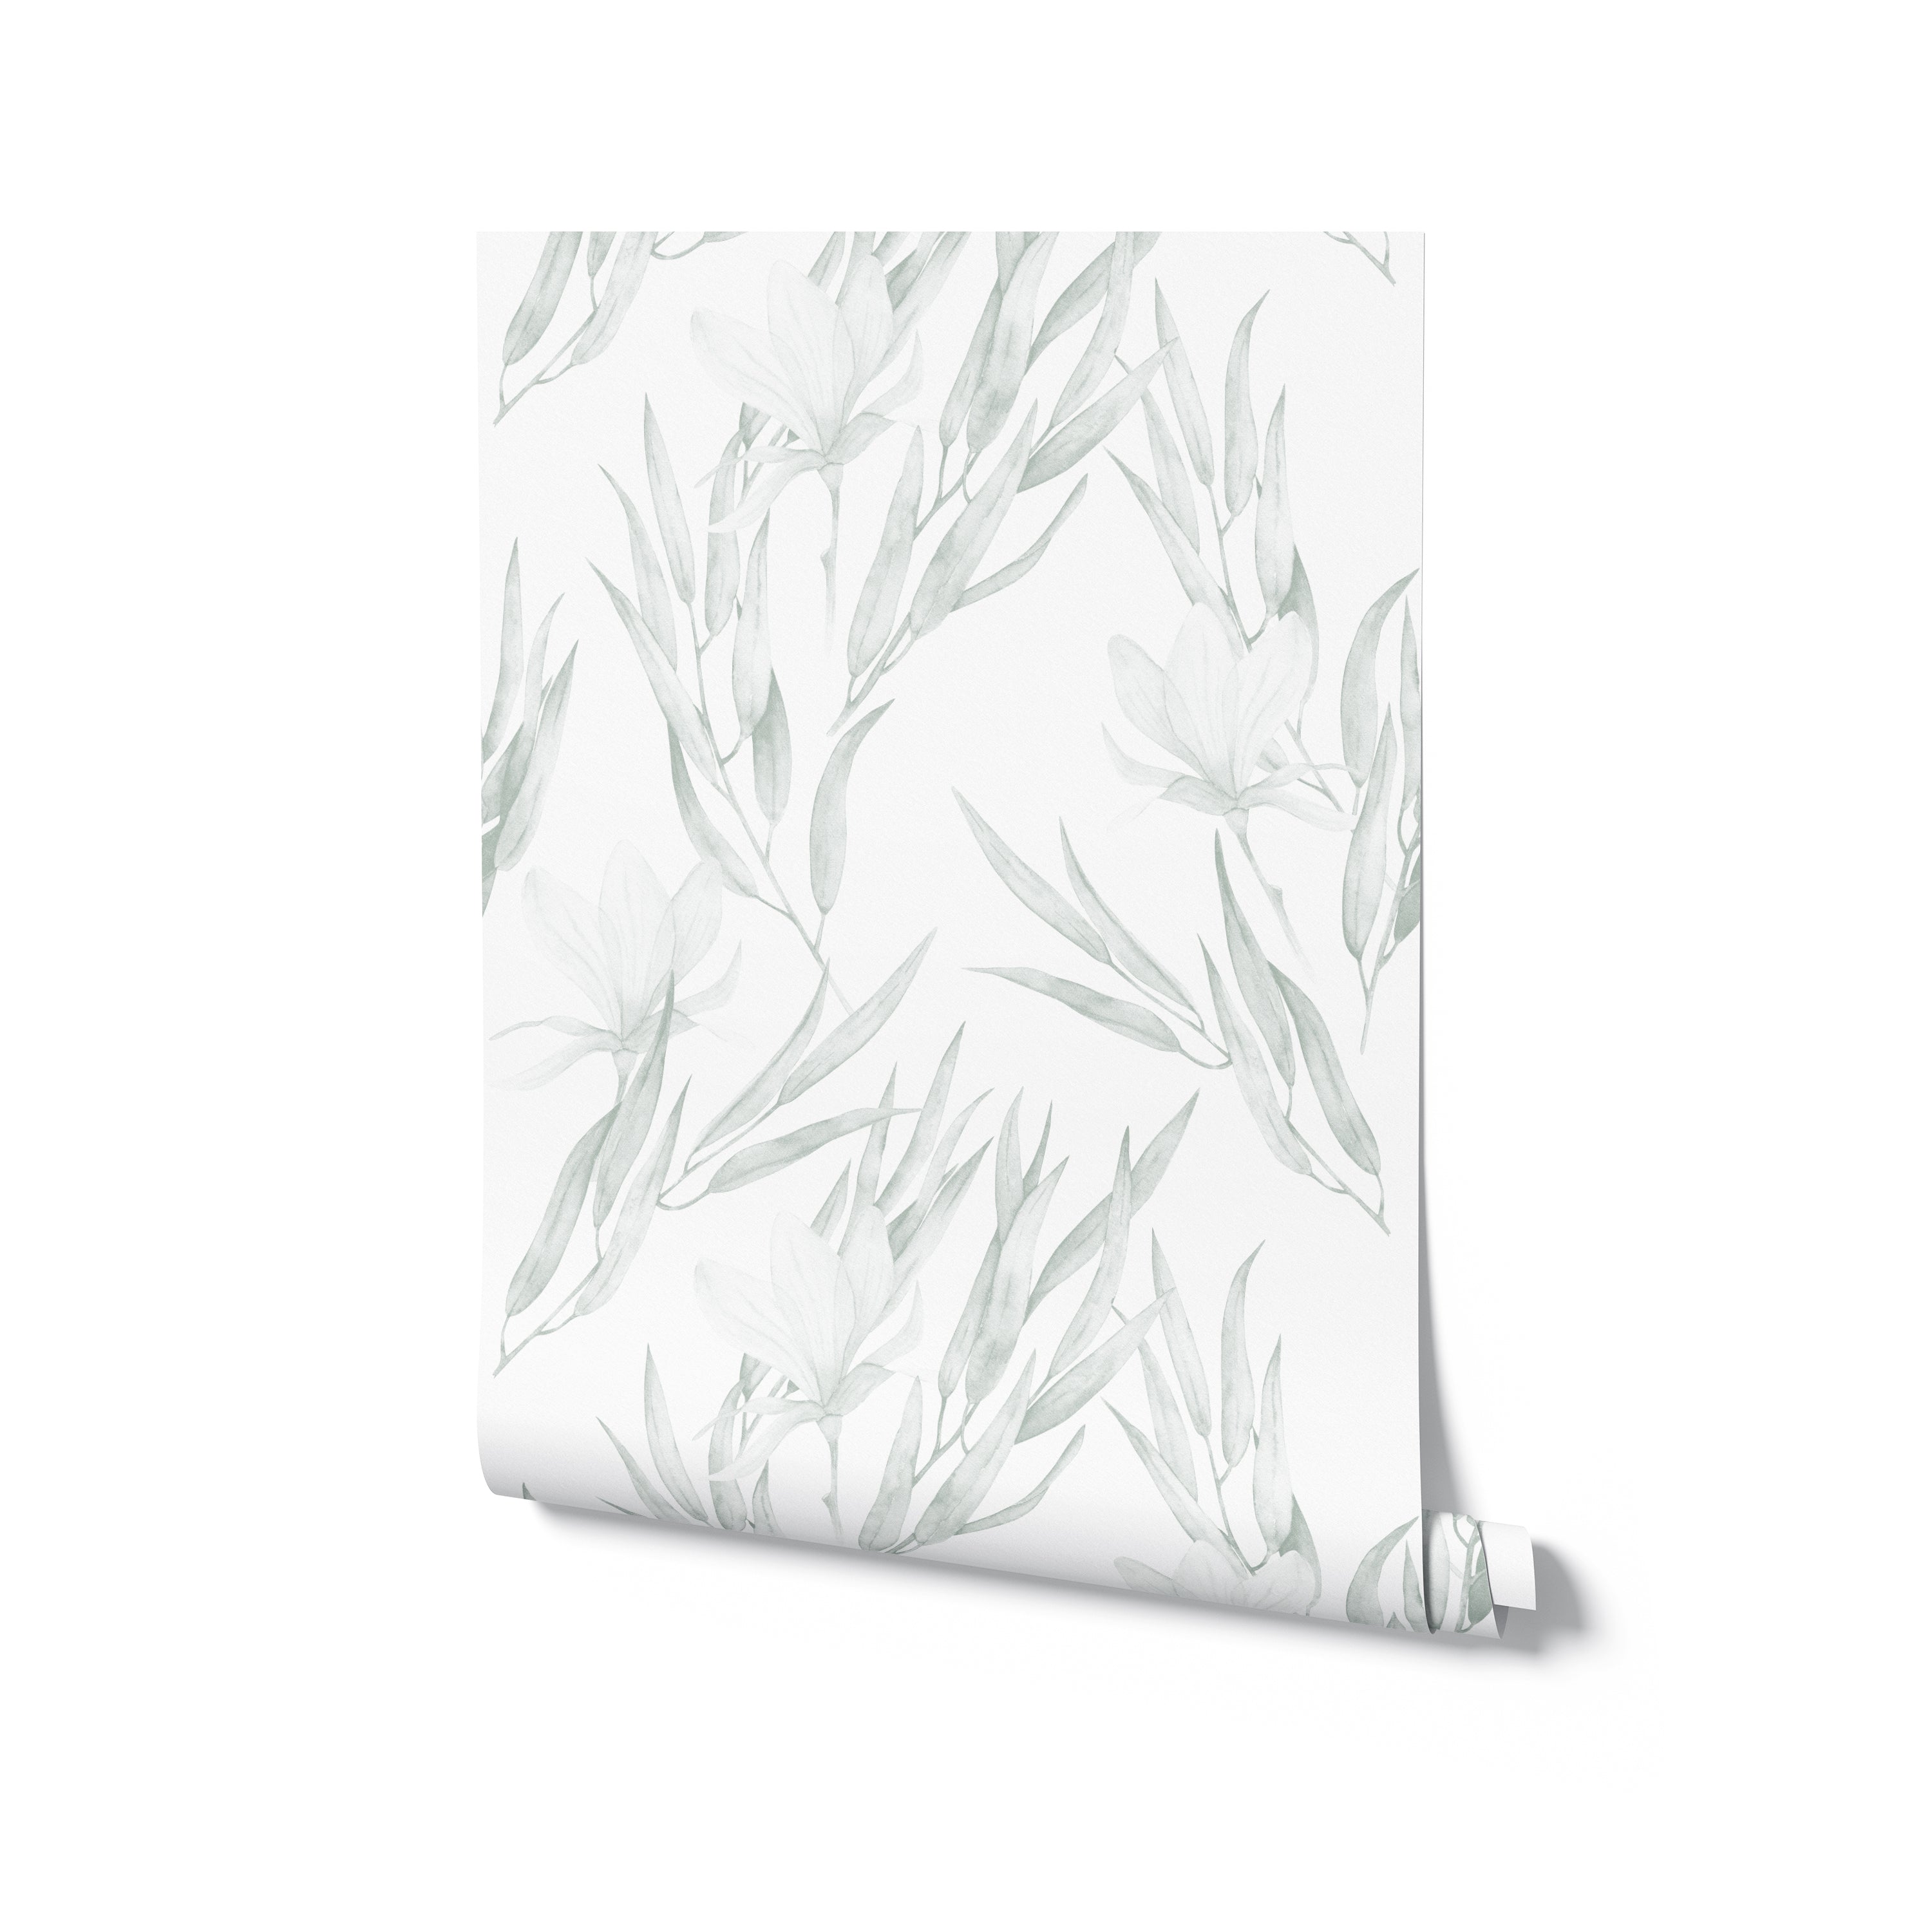 A roll of the White Watercolour Floral Wallpaper V - Light Sage, displaying a delicate pattern of white blooms and light sage leaves on a white background, unrolled slightly to reveal the artistic detail.